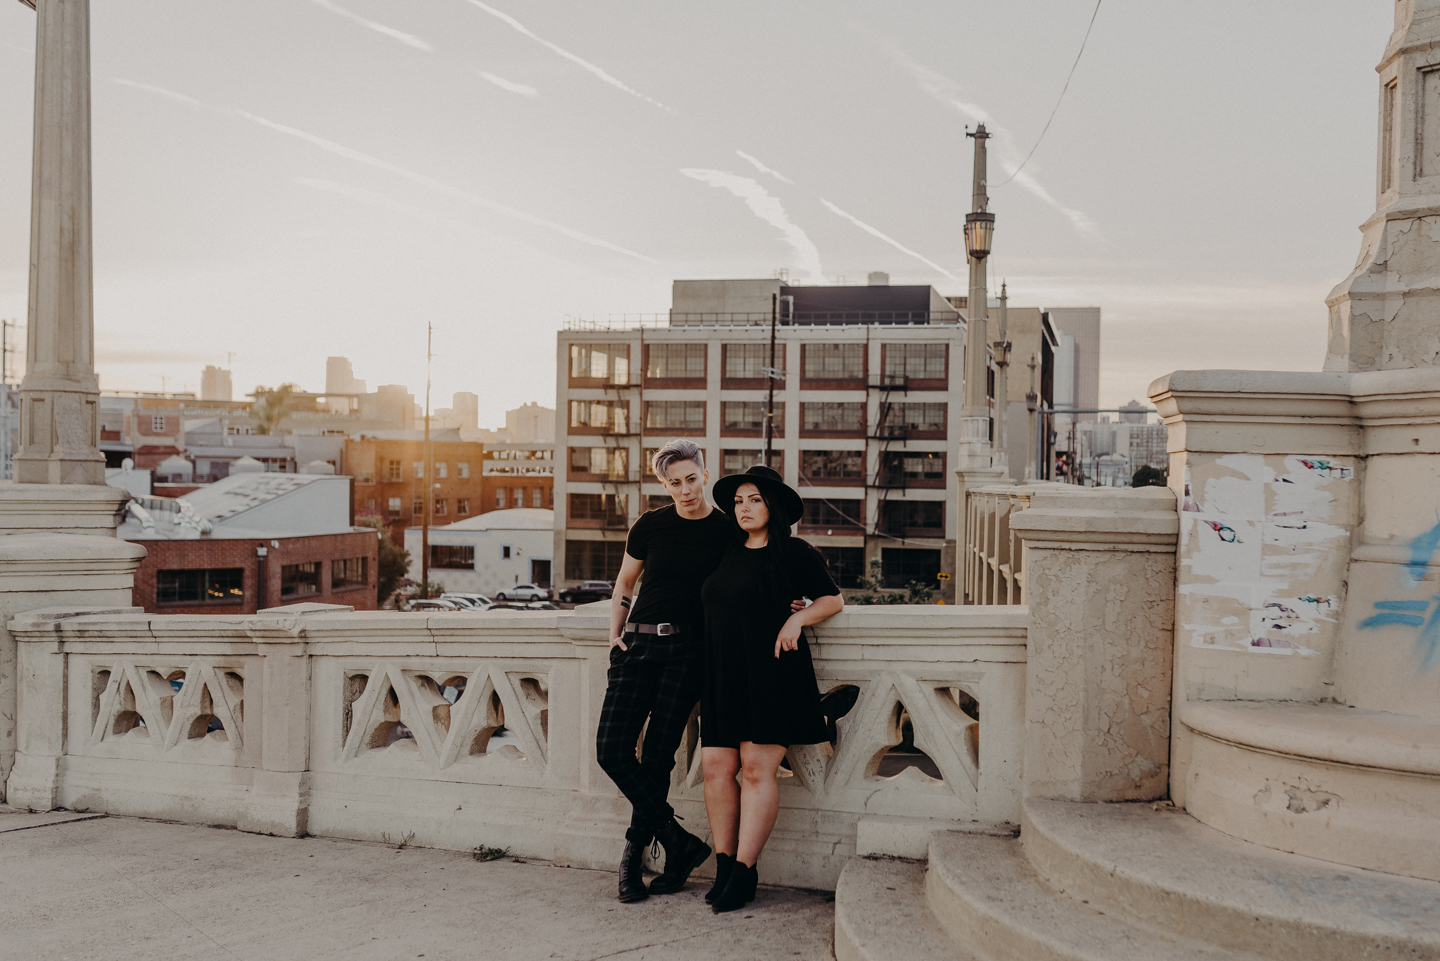 queer wedding photographer in los angeles - lesbian engagement session los angeles - isaiahandtaylor.com-025.jpg